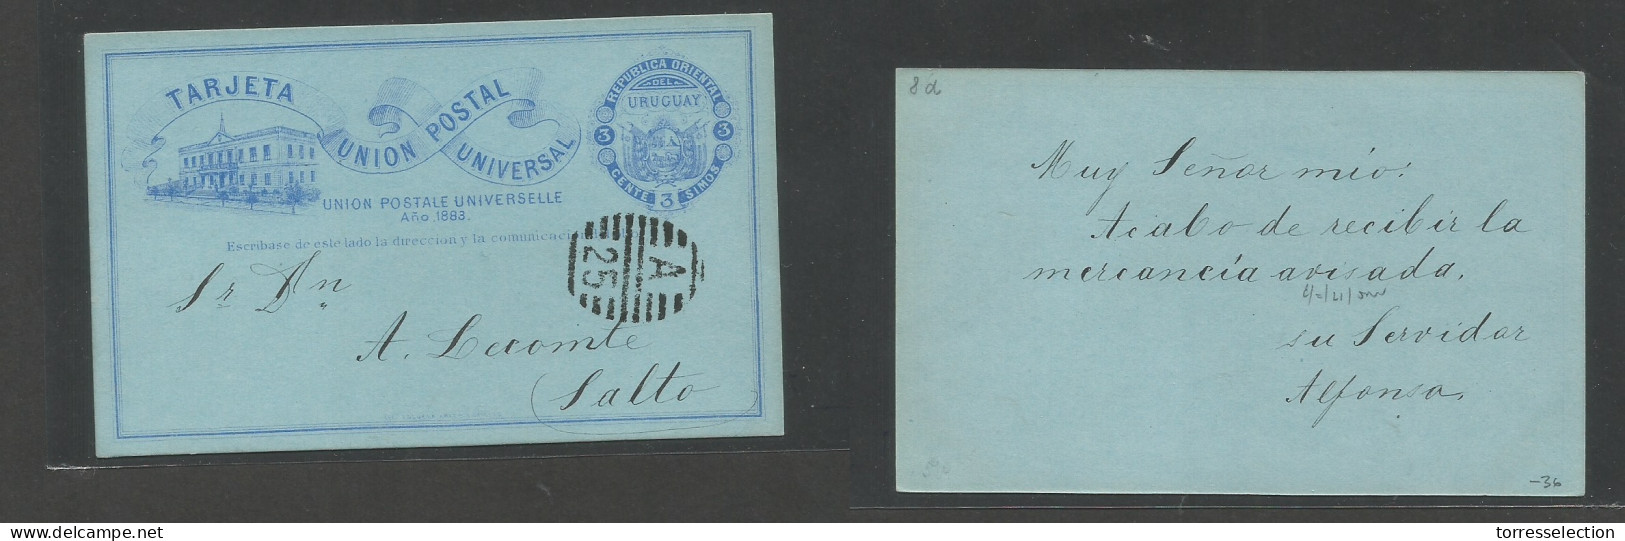 URUGUAY. 1883. 3c Blue Early Stationary Illustrated Card. On Very Rare Local Usage To Salto Cancleled A. 25 Grill. XF+. - Uruguay